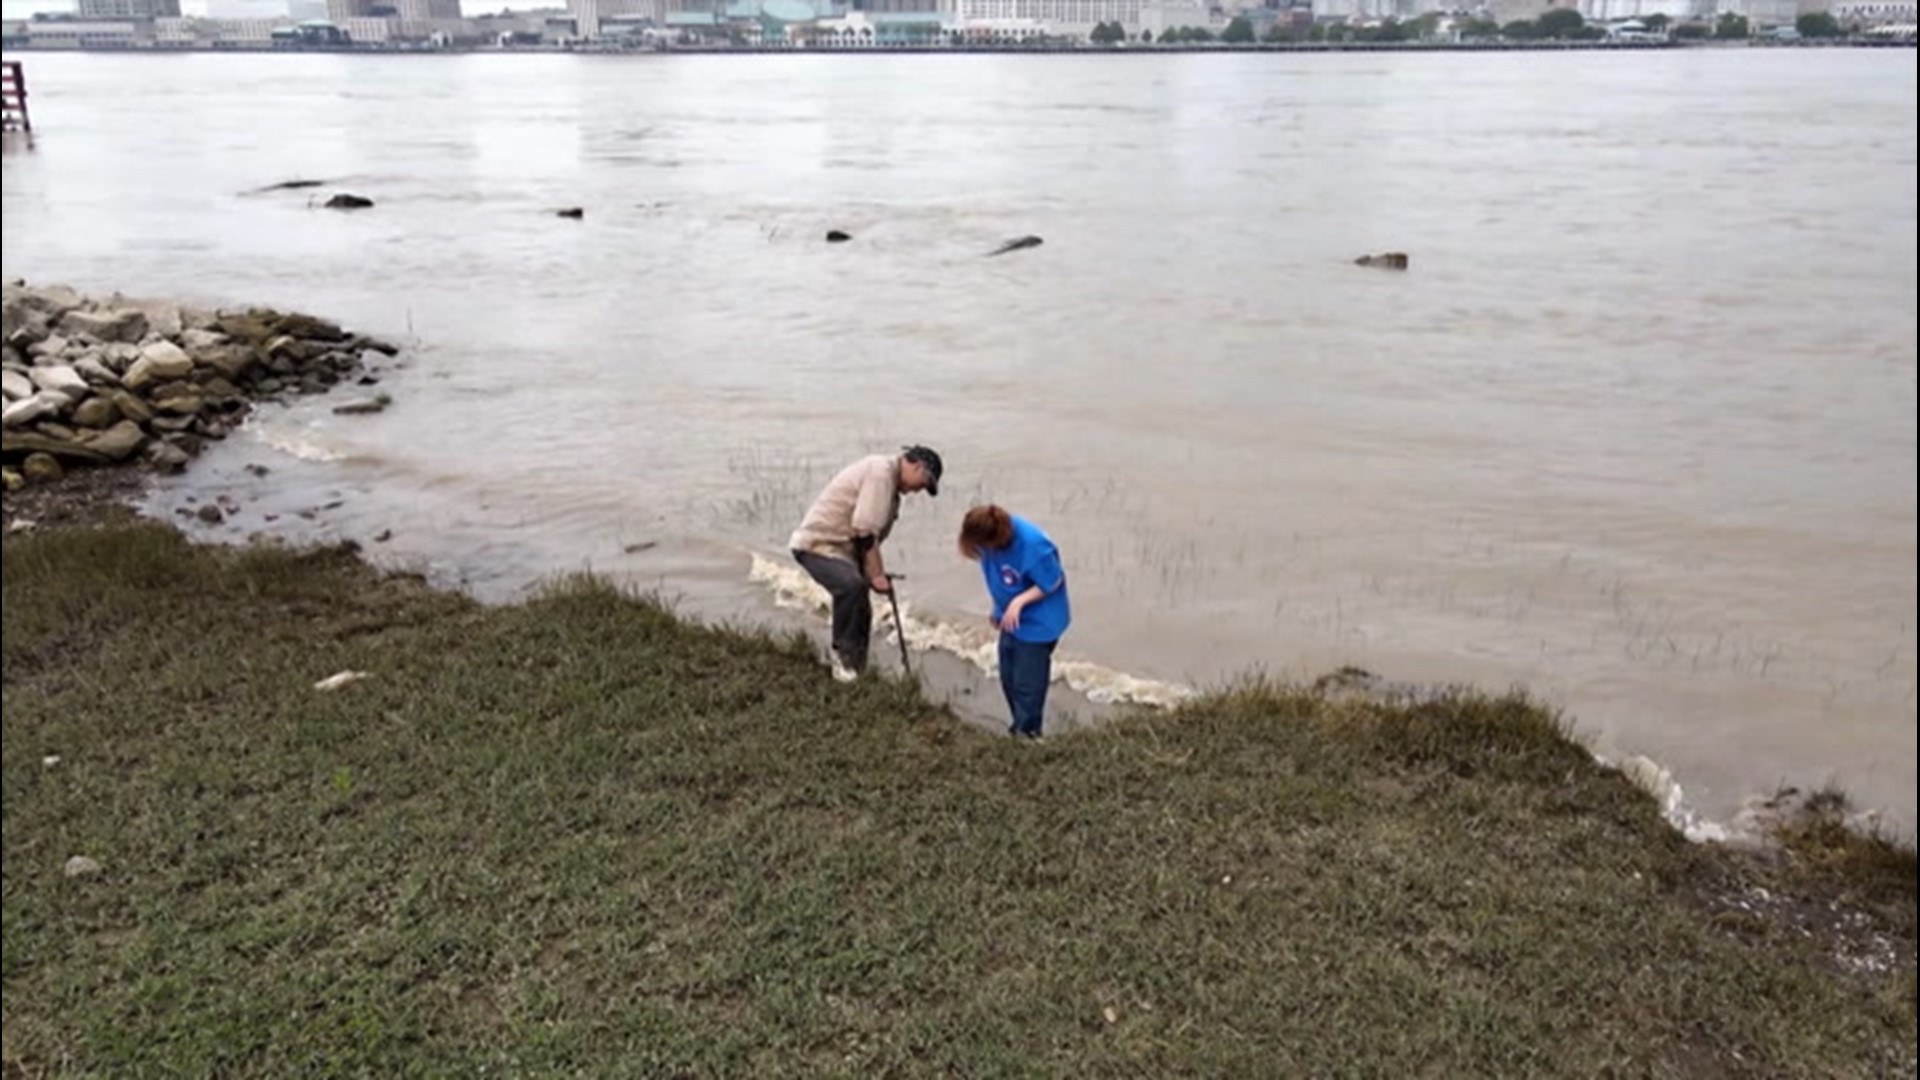 A relic hunter in New Orleans says tropical storms and floods can help uncover historic artifacts along the banks of the Mississippi River.